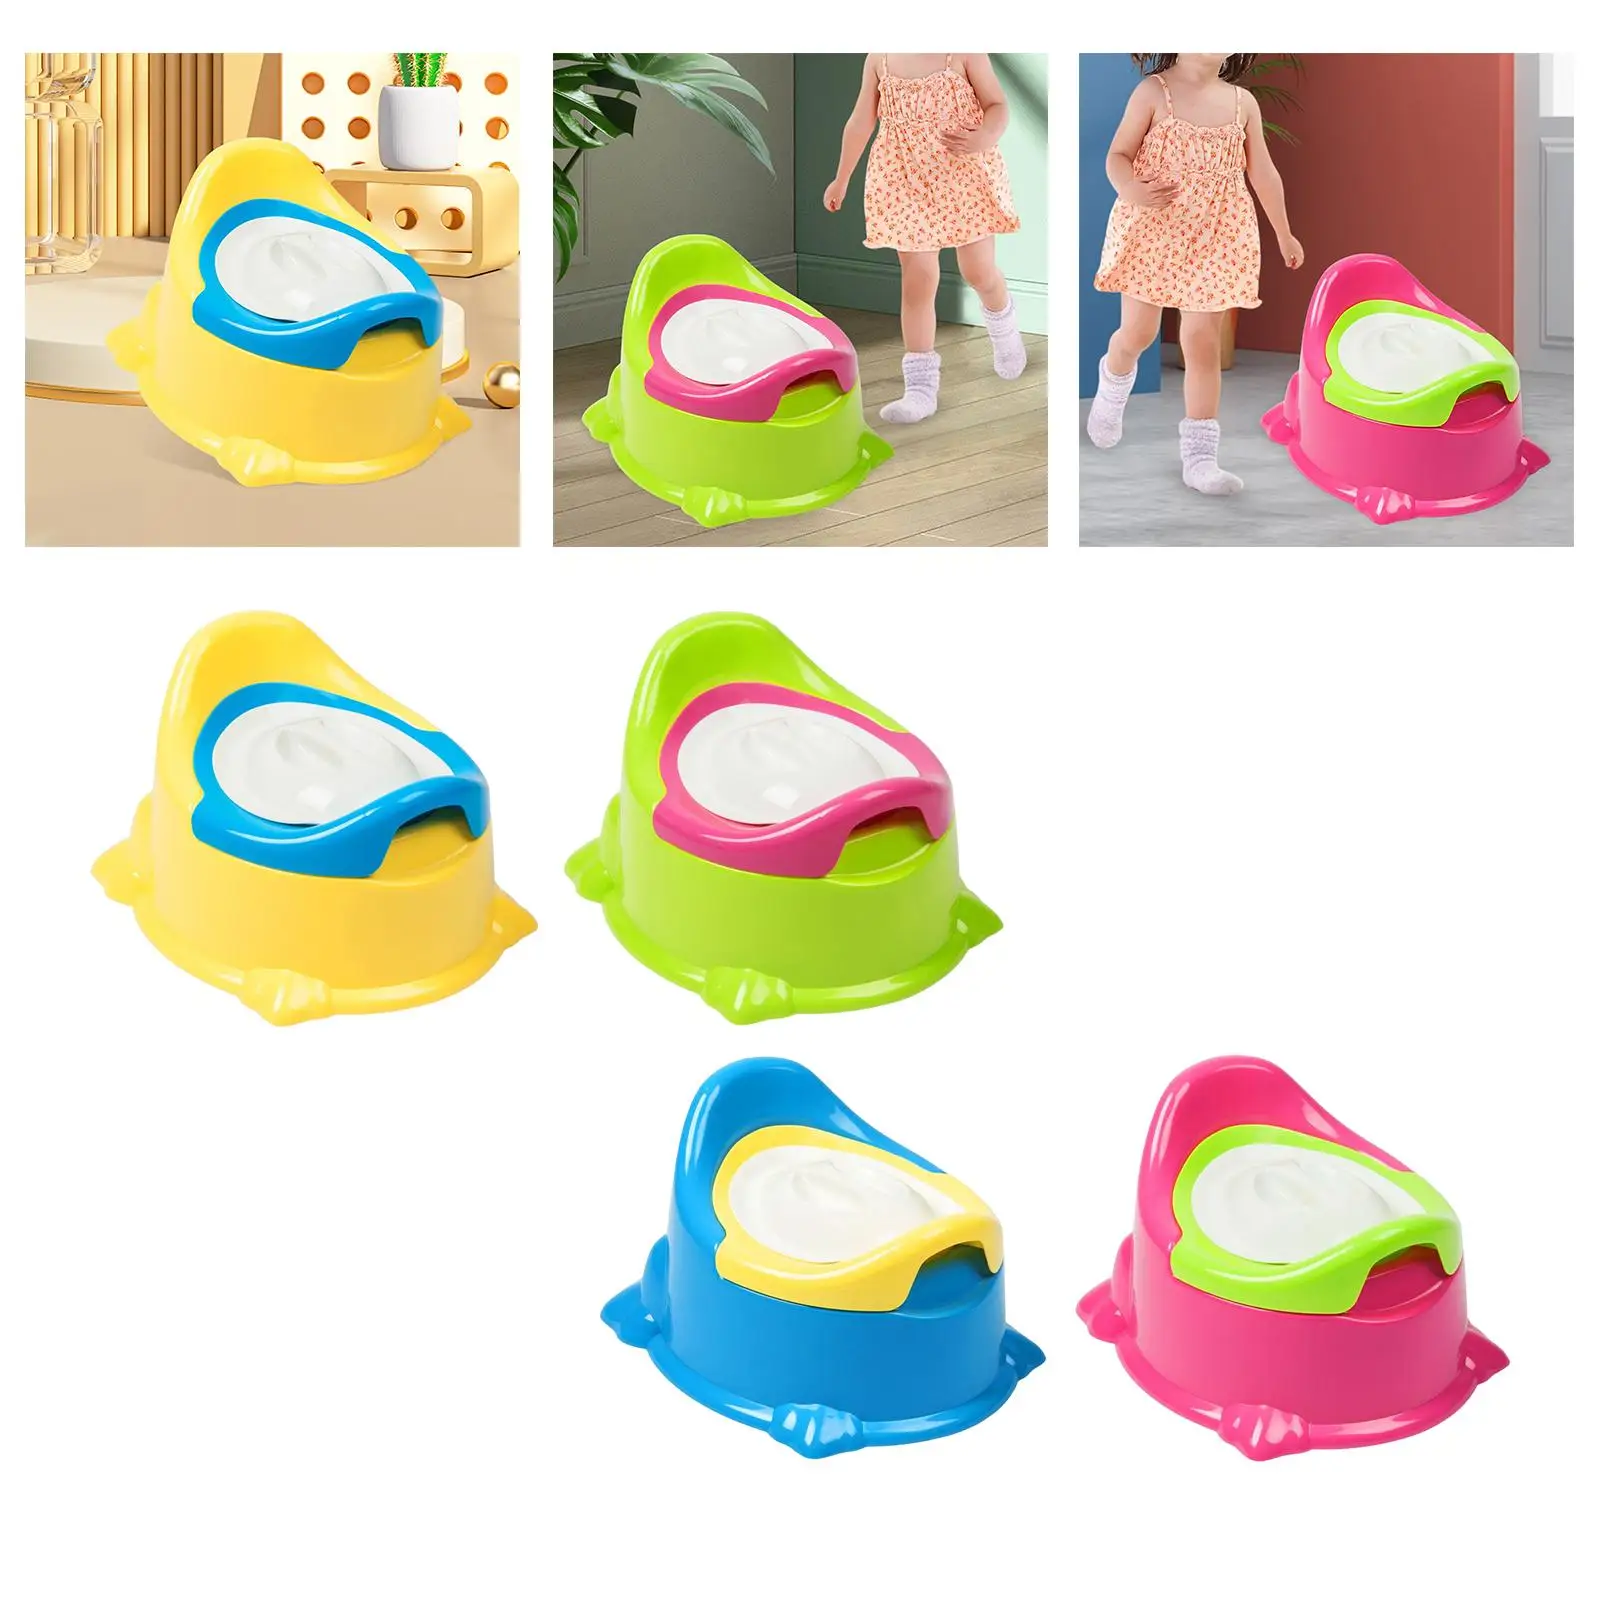 Portable Baby Potty Toilet Training Seat Comfortable Stable Anti Skid Trainer Baby Potty Chair for Babies 6-12 Month Home